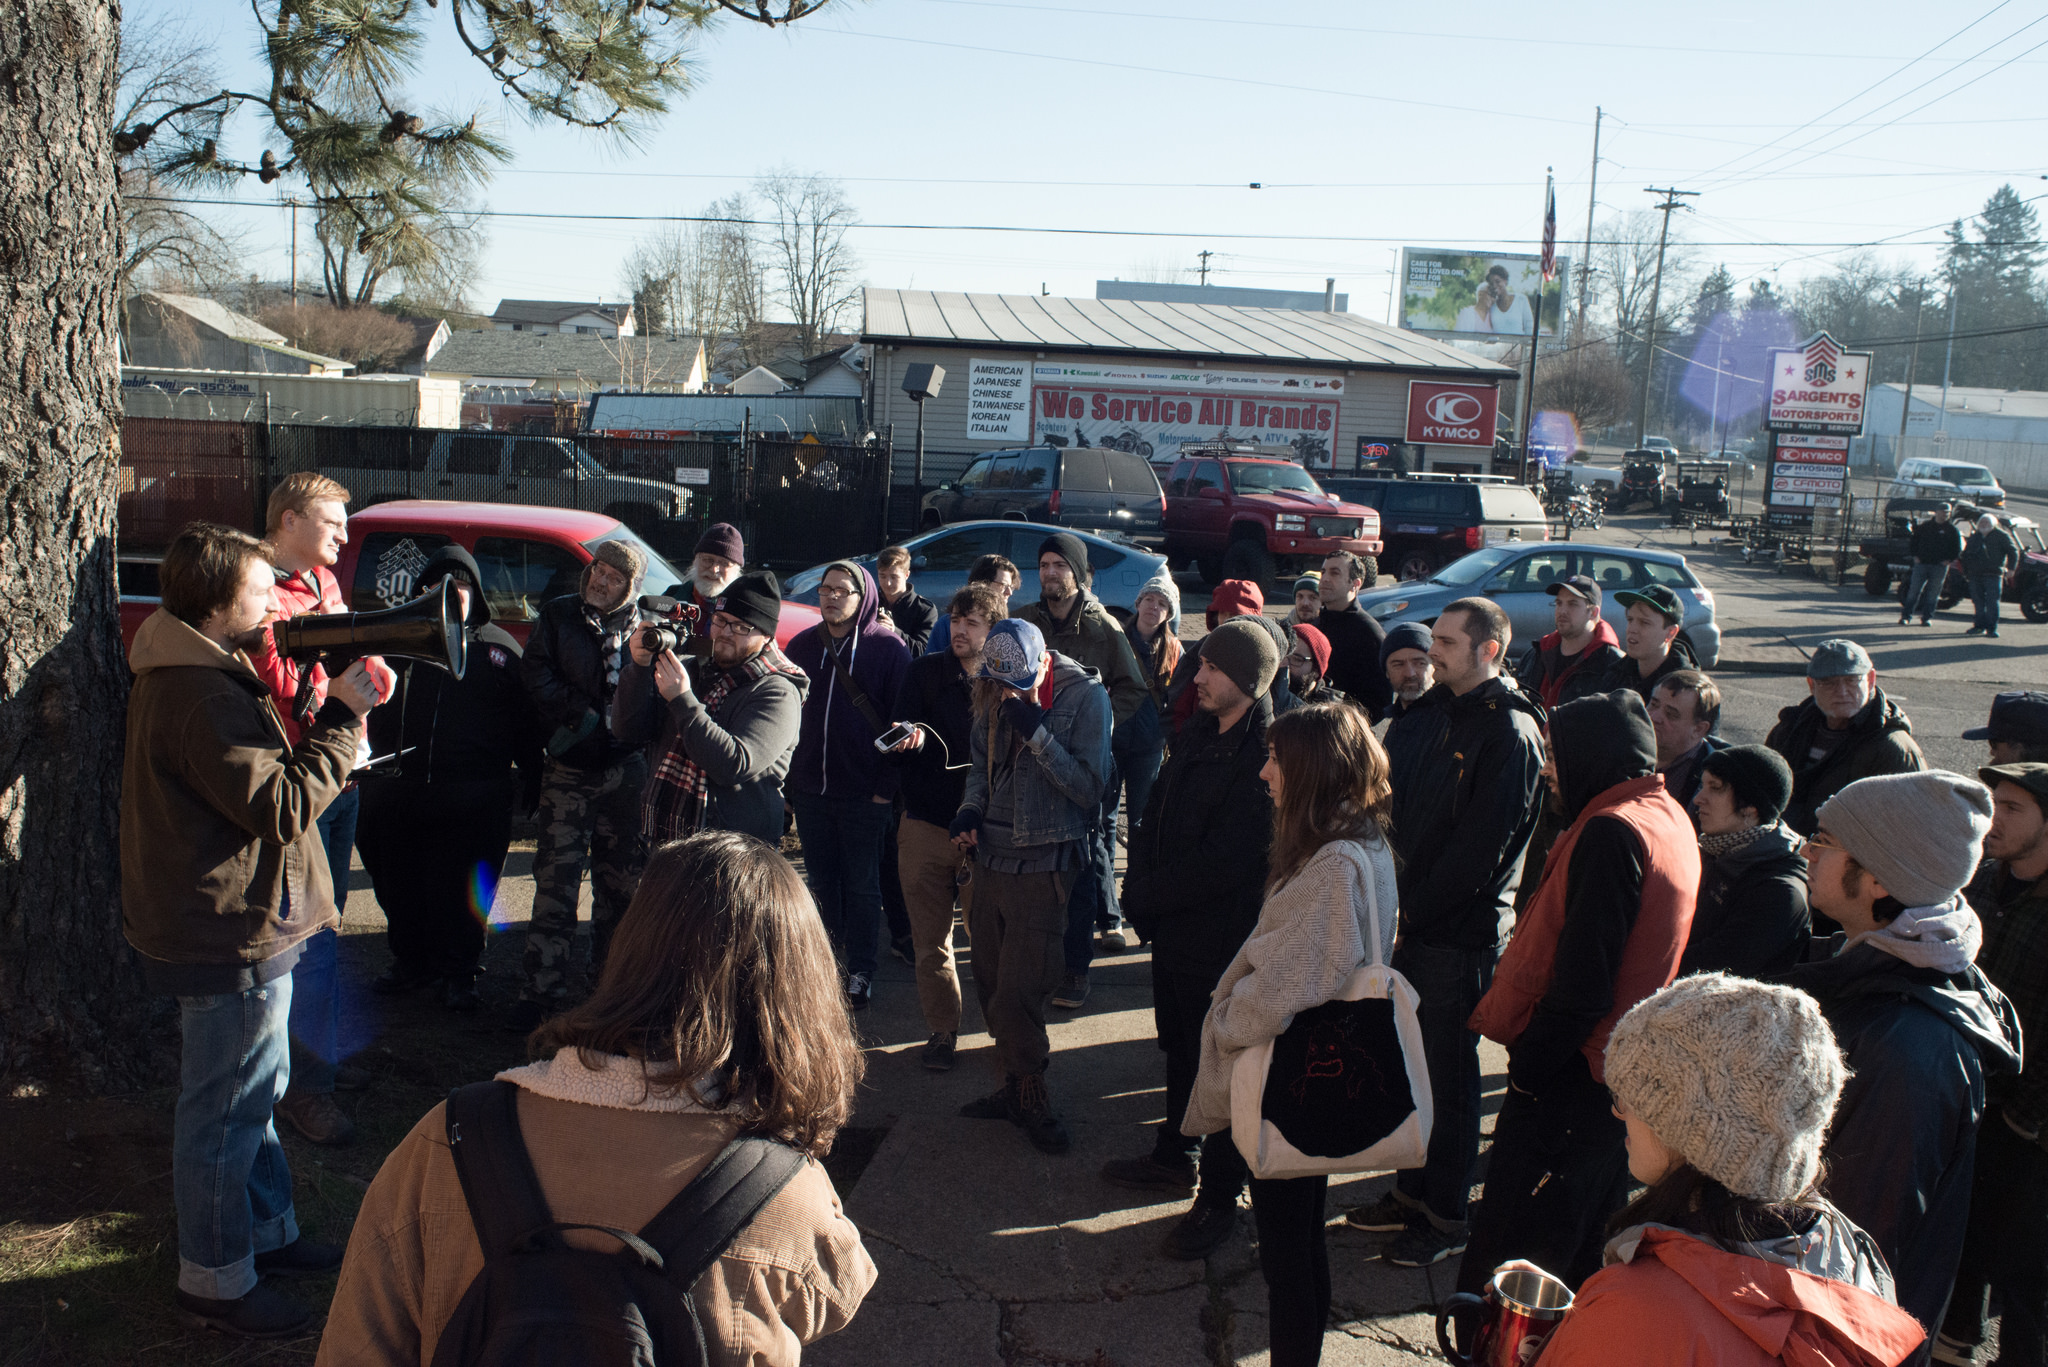 Portland Solidarity Network Delivers Demands to Foster Auto Parts [VIDEO]